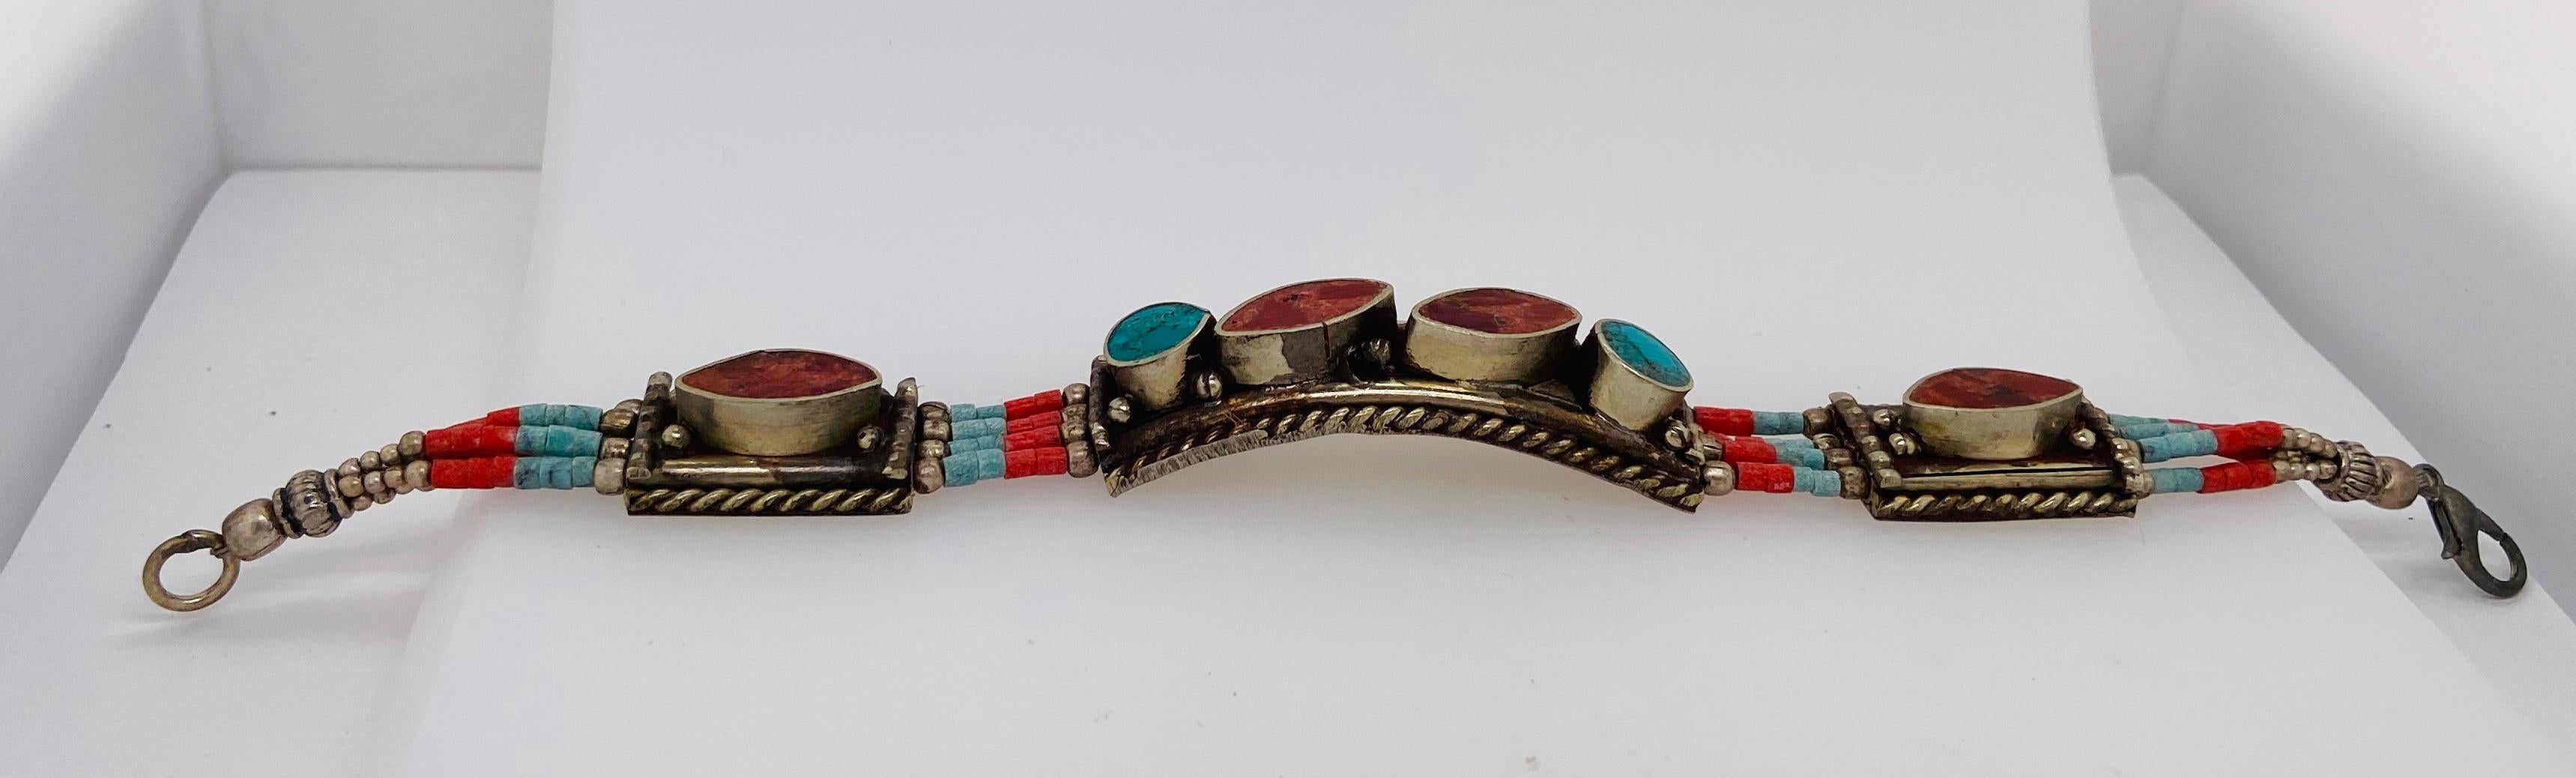 1920s Tribal Antique Moroccan Silver Bracelet In Good Condition For Sale In Plainview, NY